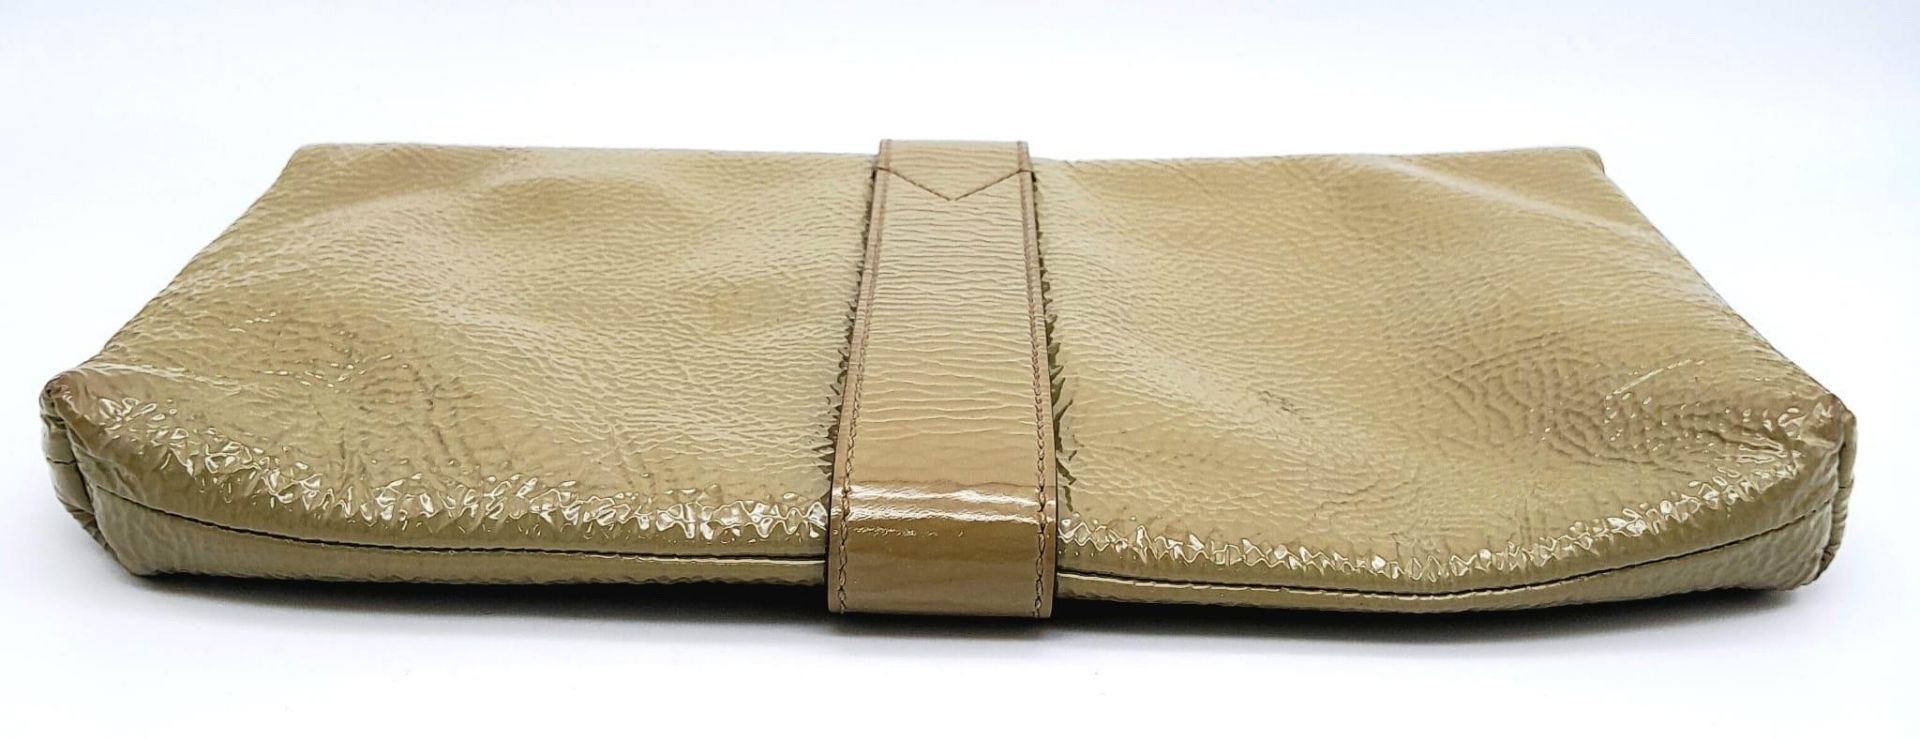 A Mulberry Harriet Khaki Leather Clutch Bag. Spongy patent leather exterior with gold-tone hardware, - Image 3 of 10